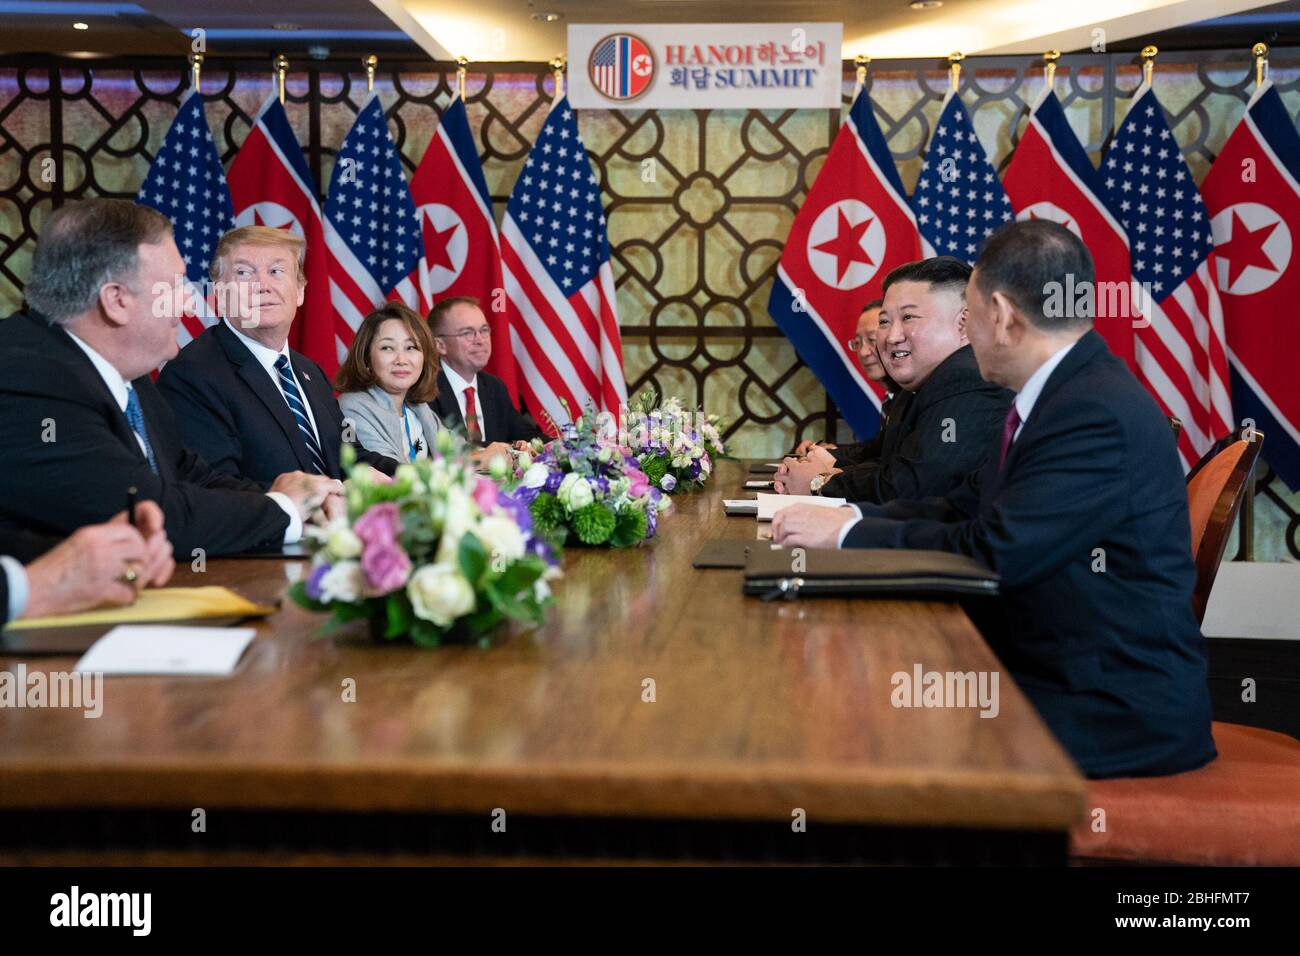 Hanoi, Vietnam. 27th Feb, 2019. President Donald J. Trump and Kim Jong Un, Chairman of the State Affairs Commission of the Democratic PeopleÕs Republic of Korea, participate in an expanded bilateral meeting Thursday, Feb. 28, 2019, at the Sofitel Legend Metropole hotel in Hanoi. People: President Donald Trump, Kim Jong Un Credit: Storms Media Group/Alamy Live News Stock Photo